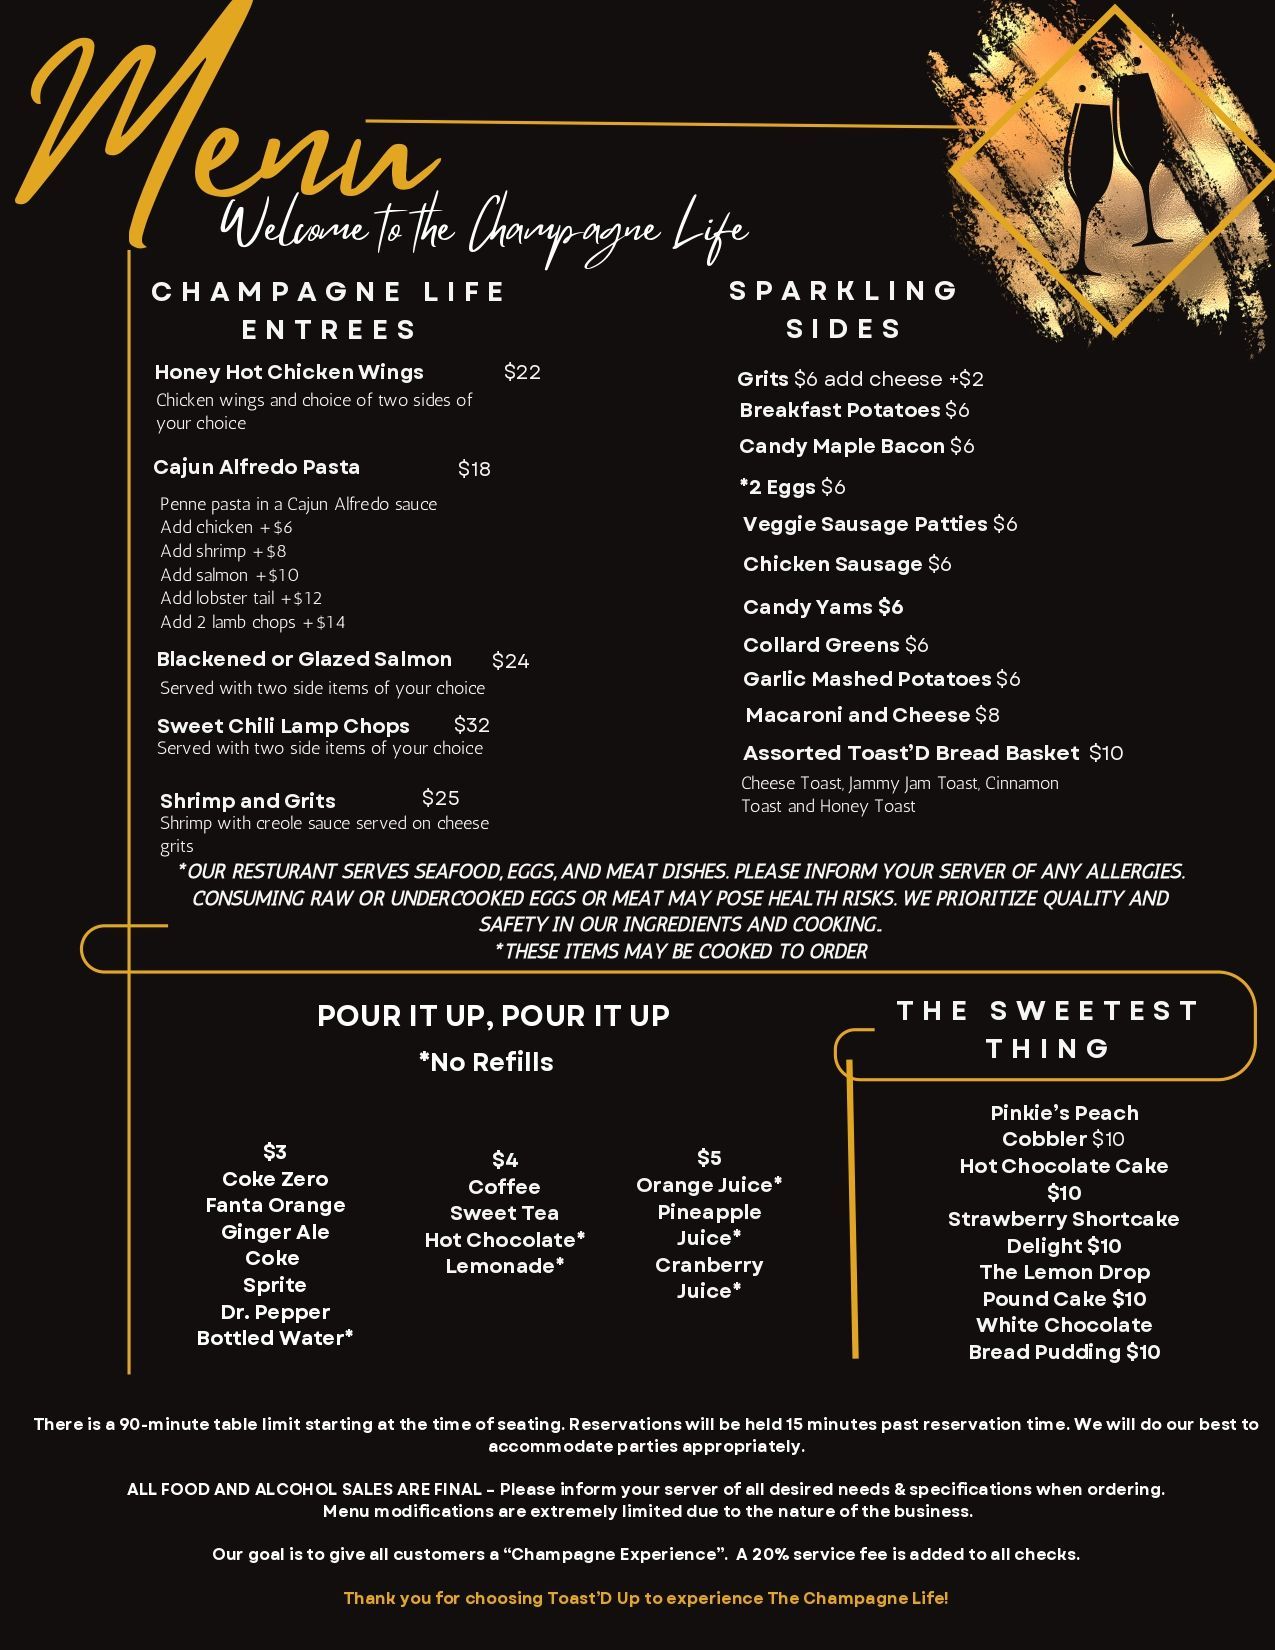 A menu for a restaurant called champagne life